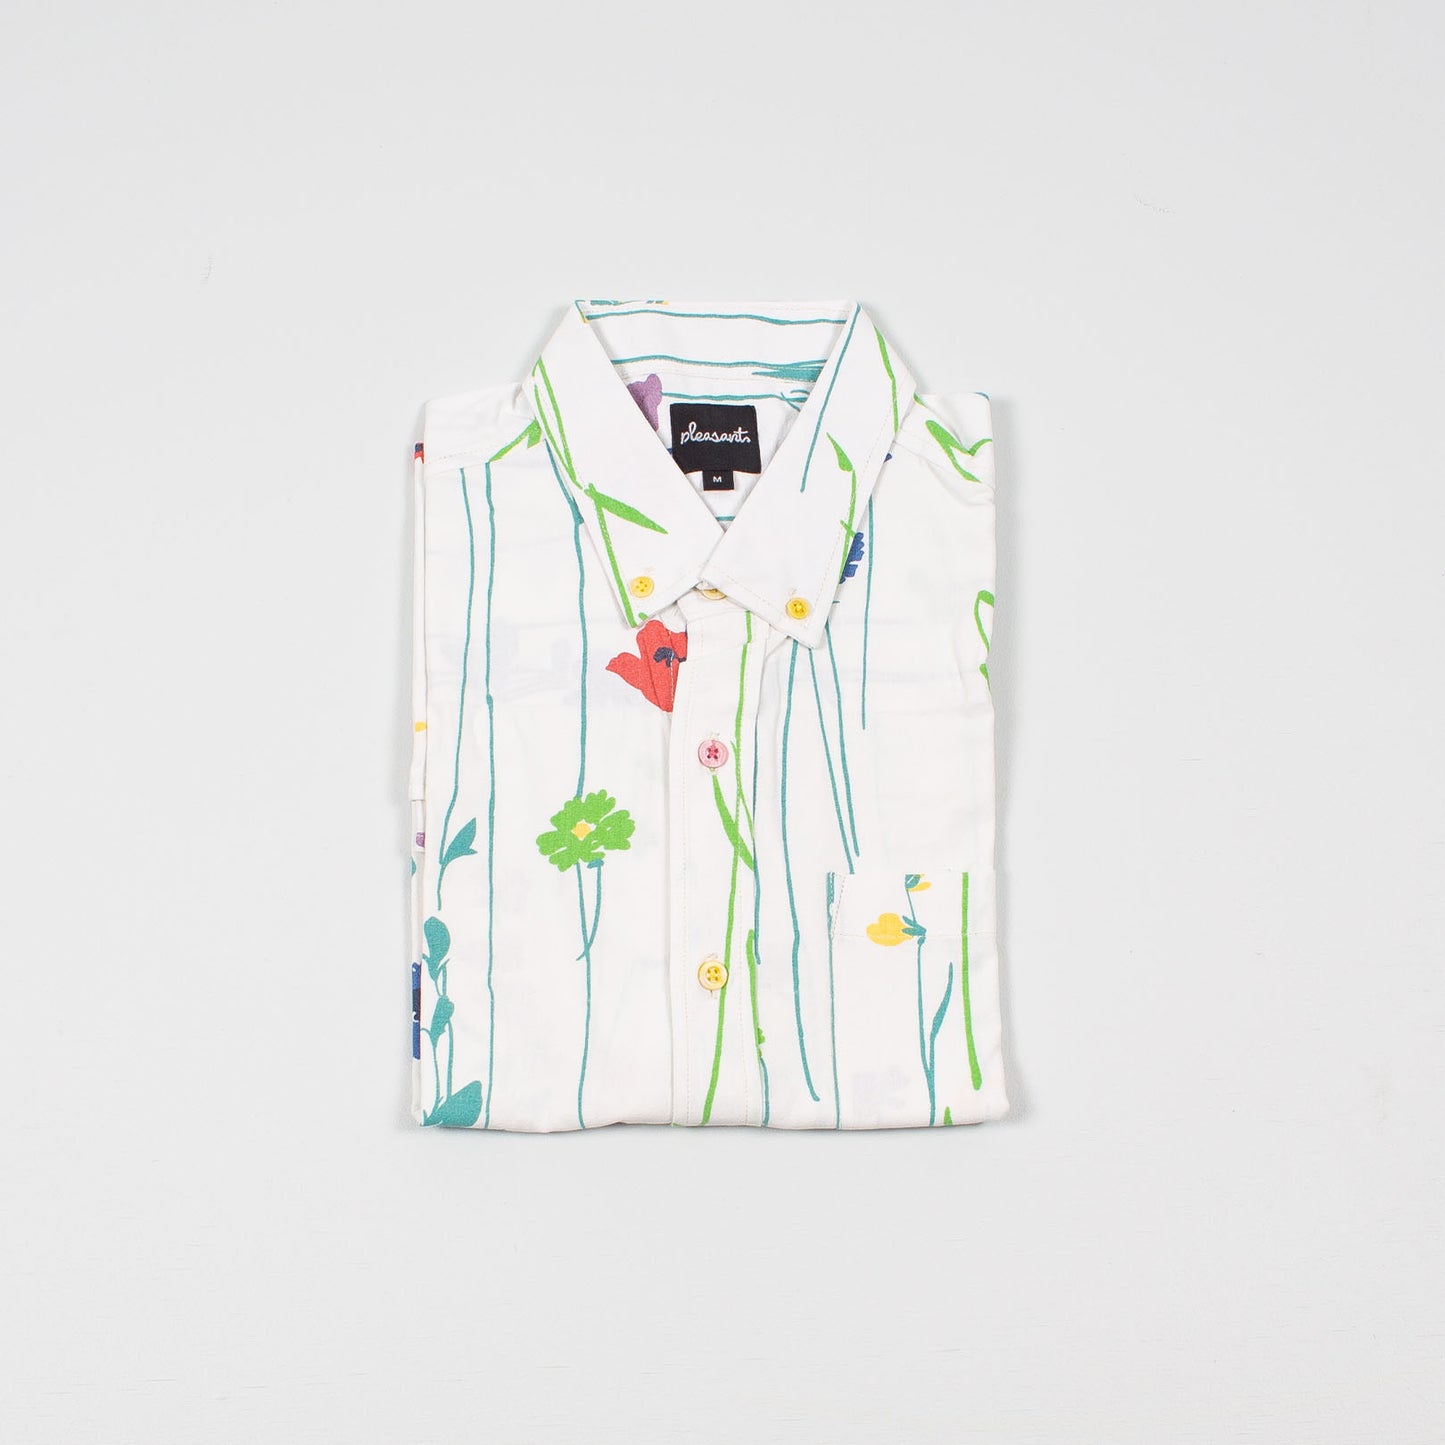 Drawing flowers upcycled shirt